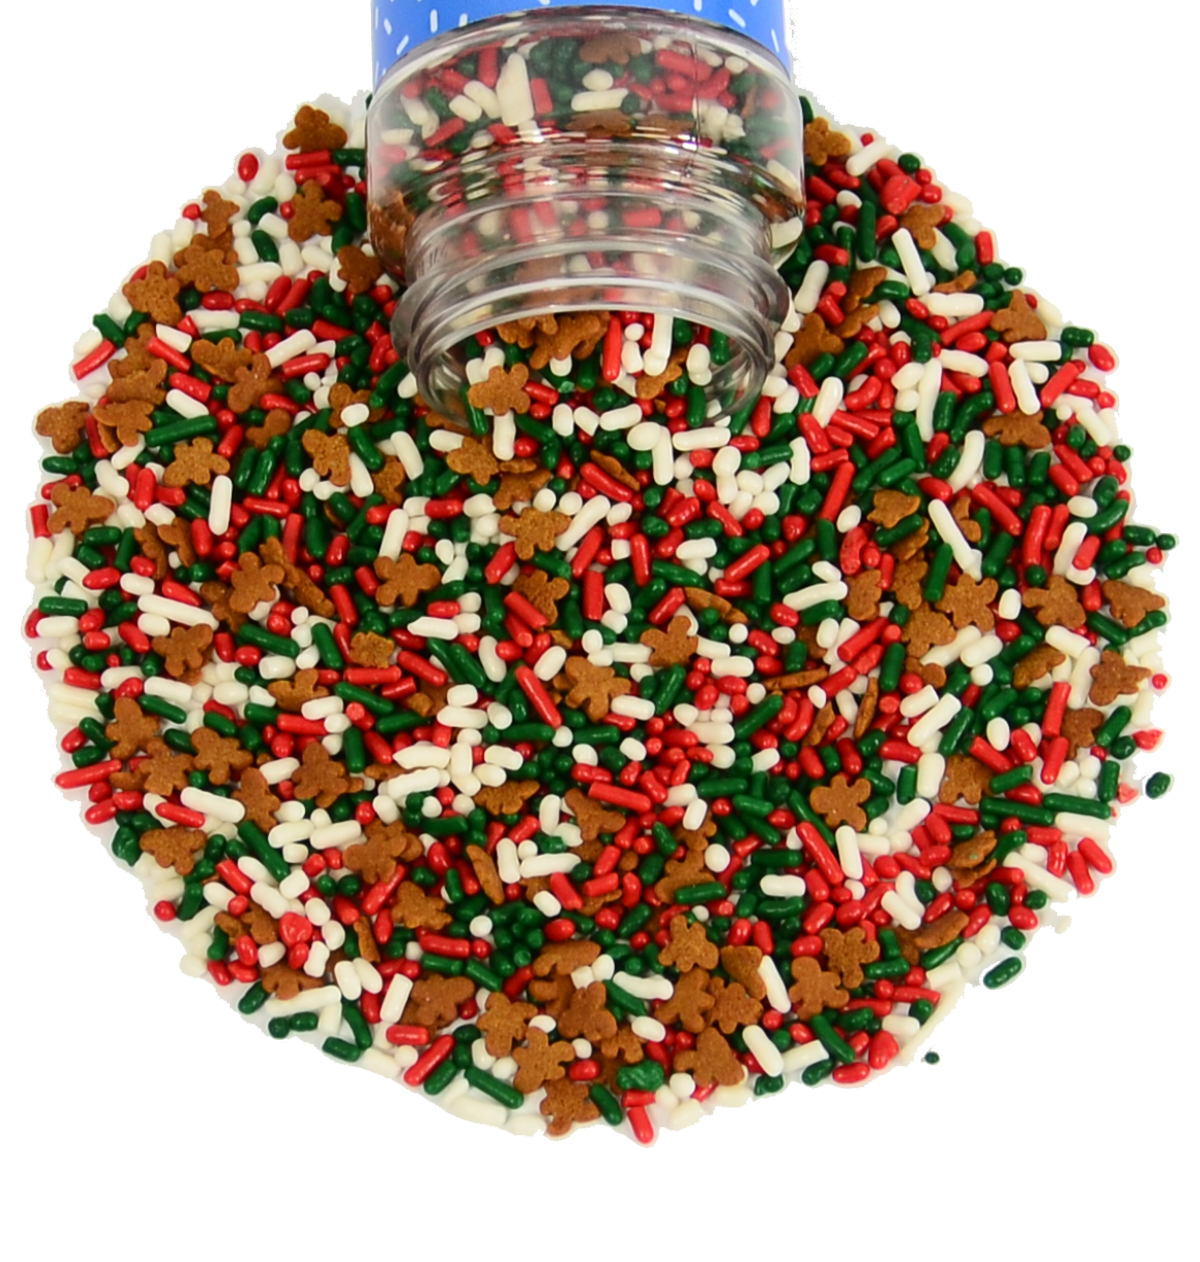 Catch Me If You Can! Sprinkle Mix 3.3oz